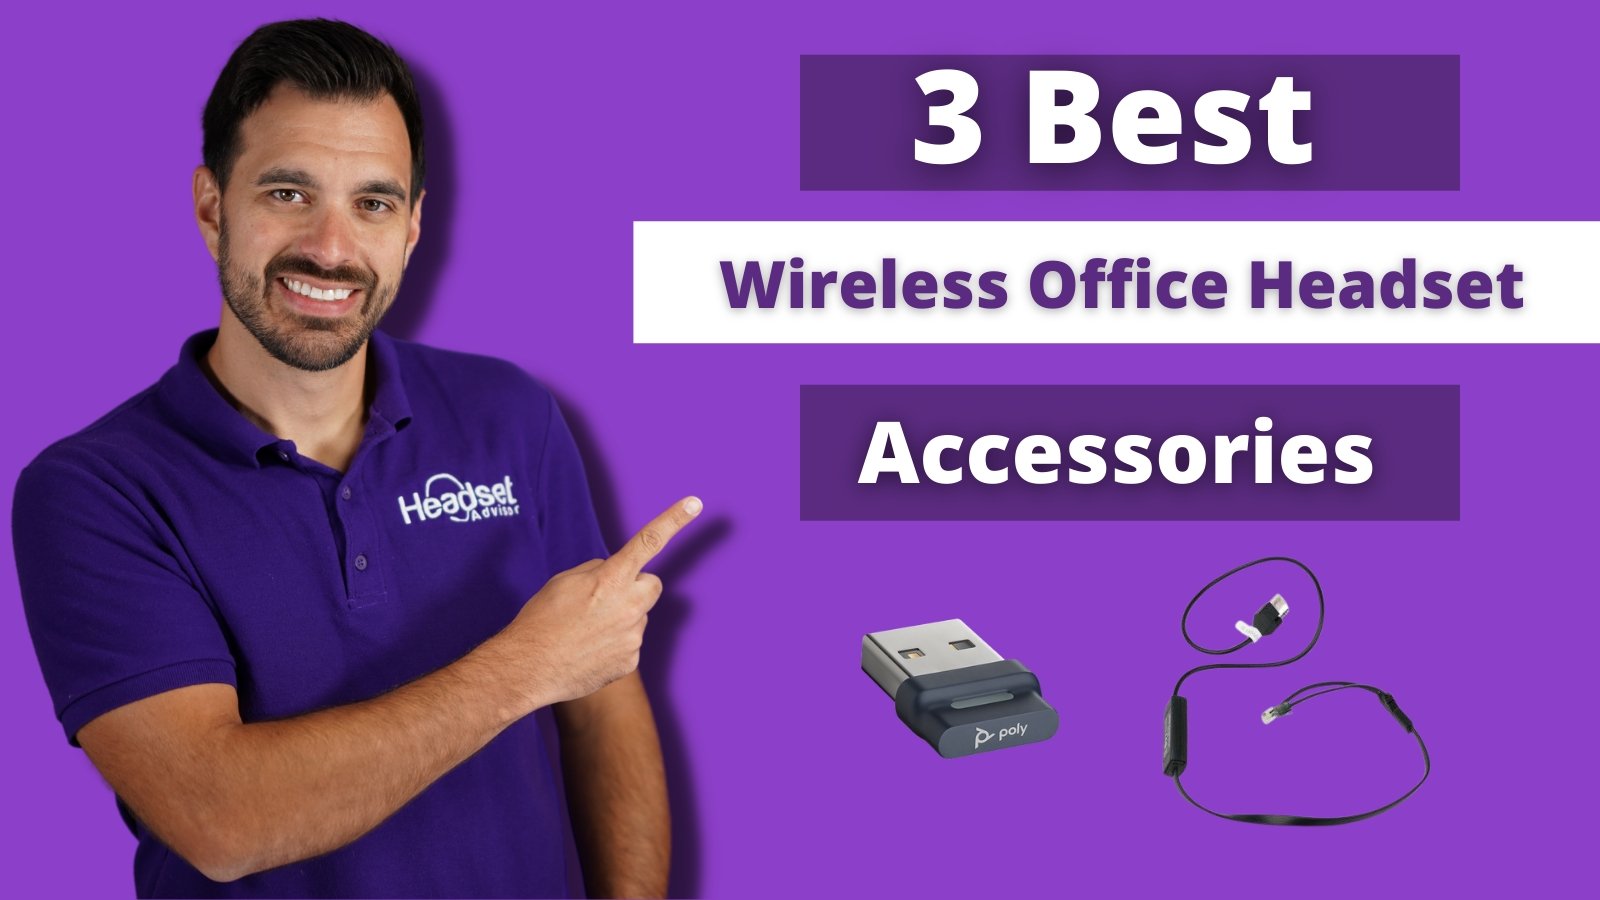 3 Best Accessories For Your Wireless Office Headset - Headset Advisor